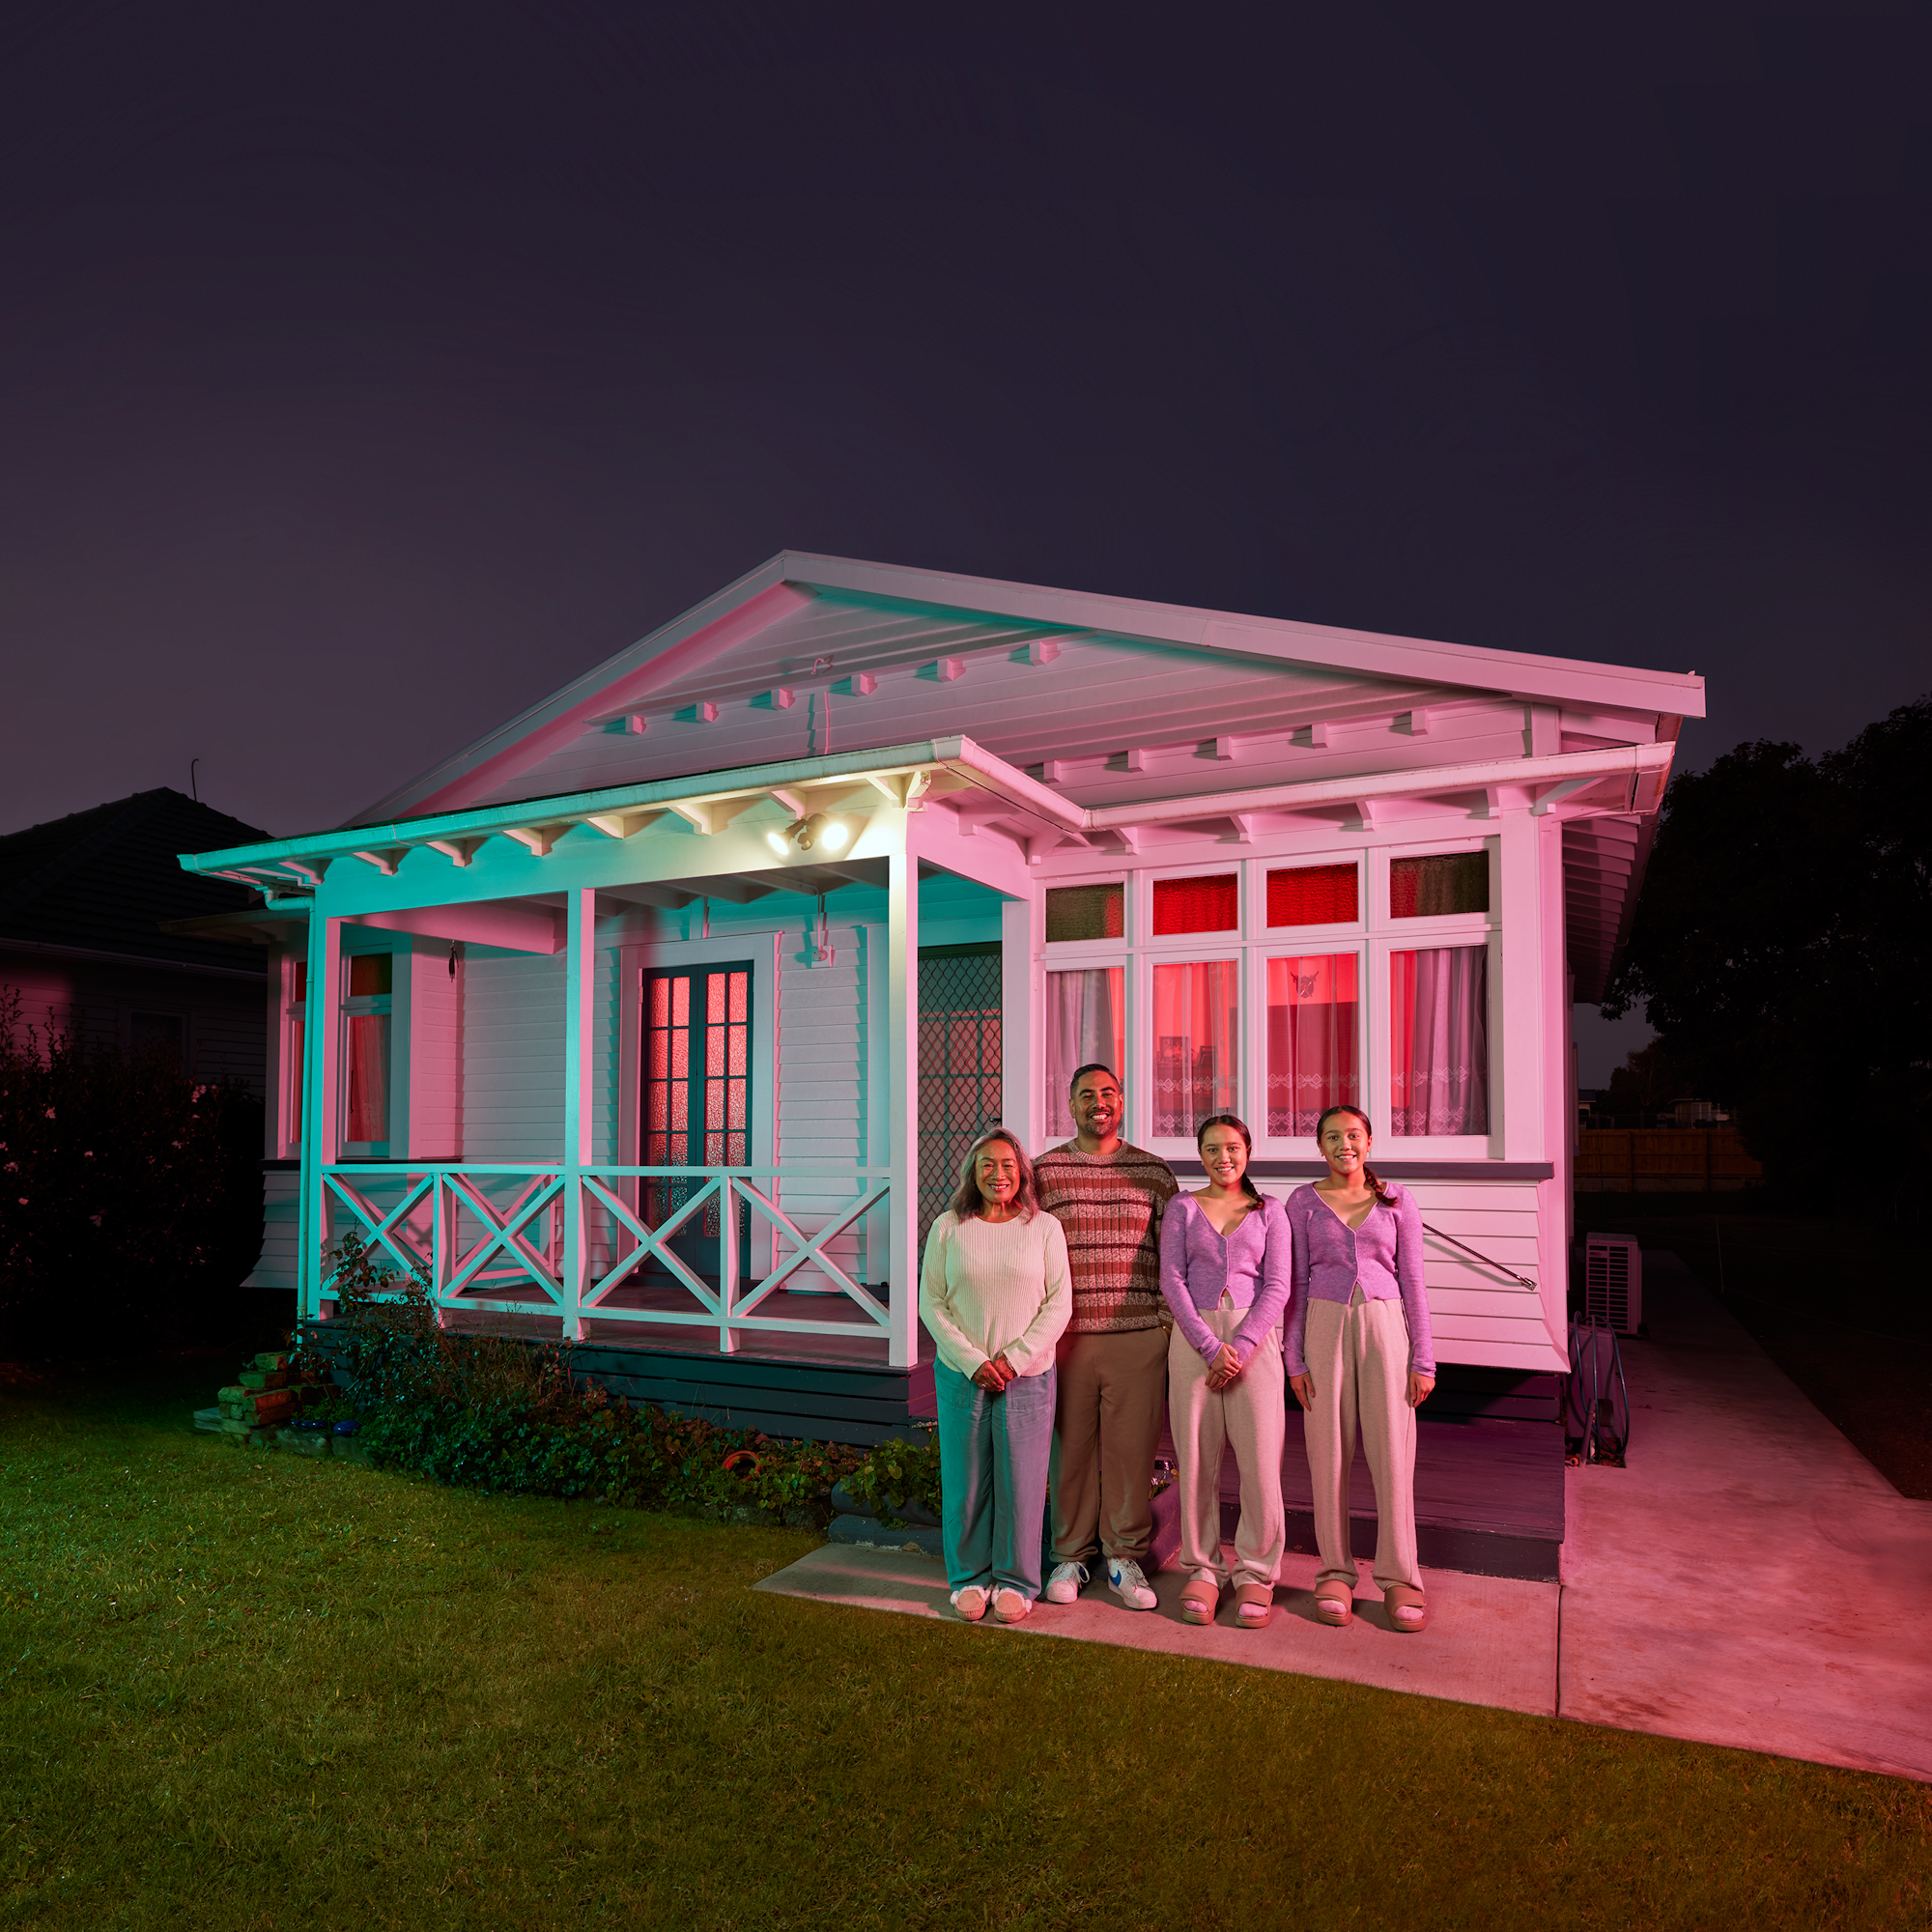 Family standing in front of house at night.